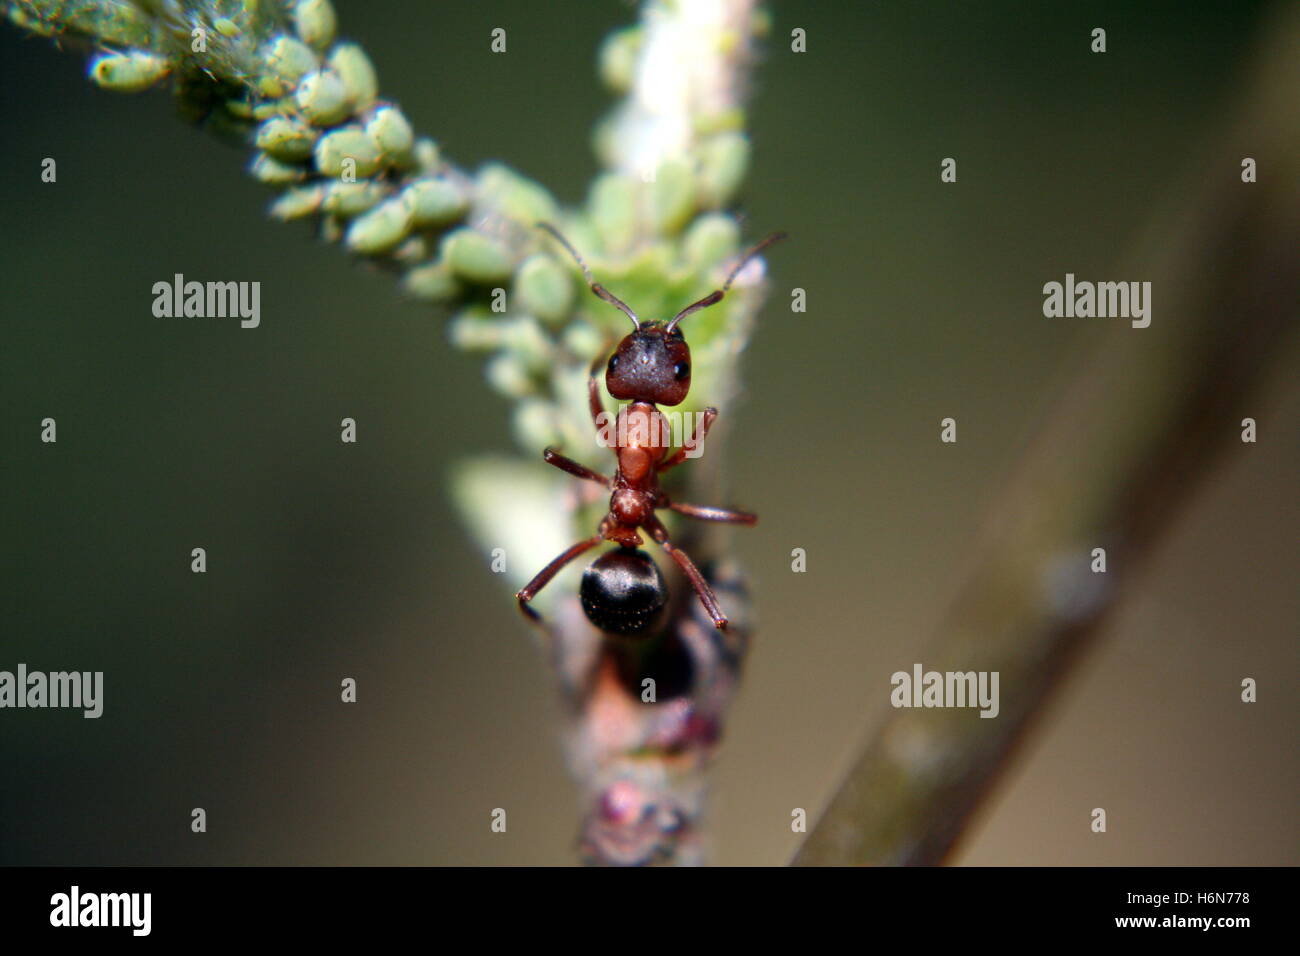 legs protected sheltered ant green walk ants antenna aphid red forest blattlause kerbtiere waldspaziergang Stock Photo